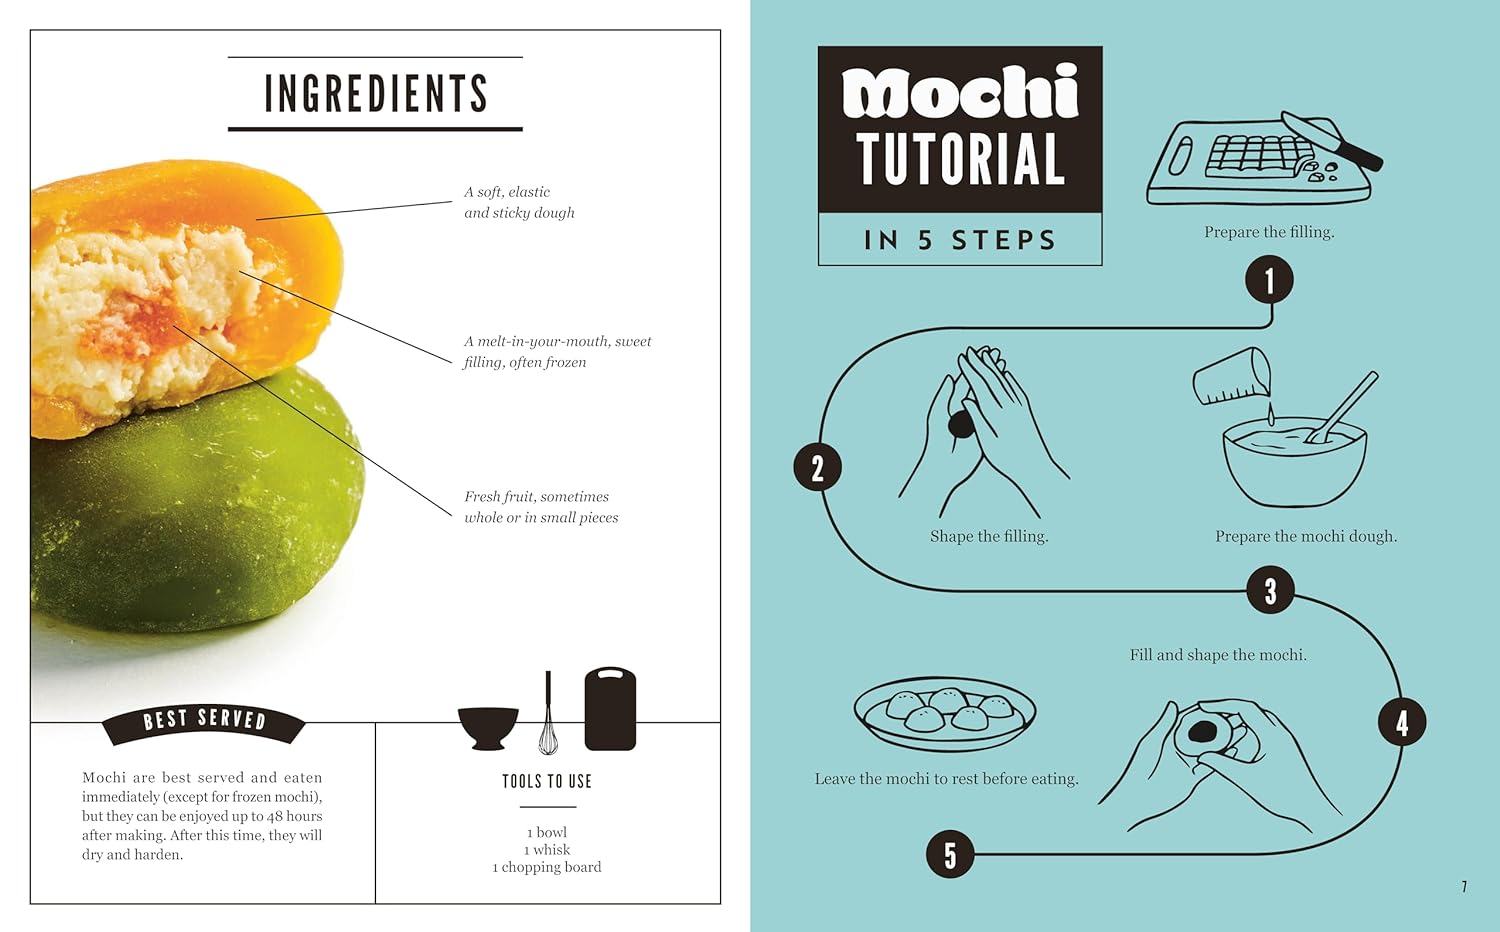 Mochi: Make your own at home!